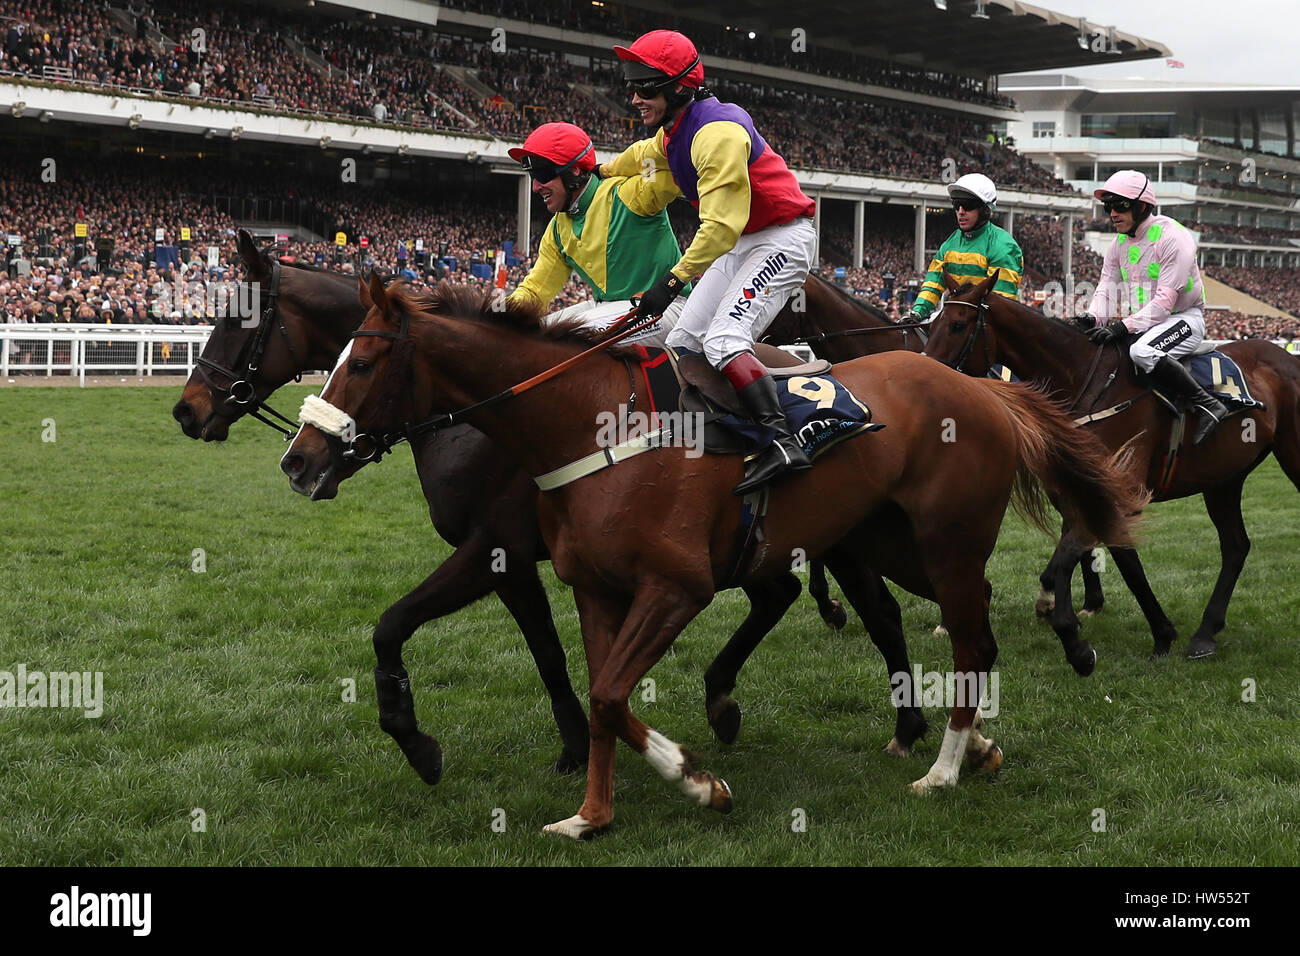 Jockey Robbie Power (left) celebrates after his winning ride on Sizing John in the Timico Cheltenham Gold Cup Chase during Gold Cup Day of the 2017 Cheltenham Festival at Cheltenham Racecourse. Stock Photo